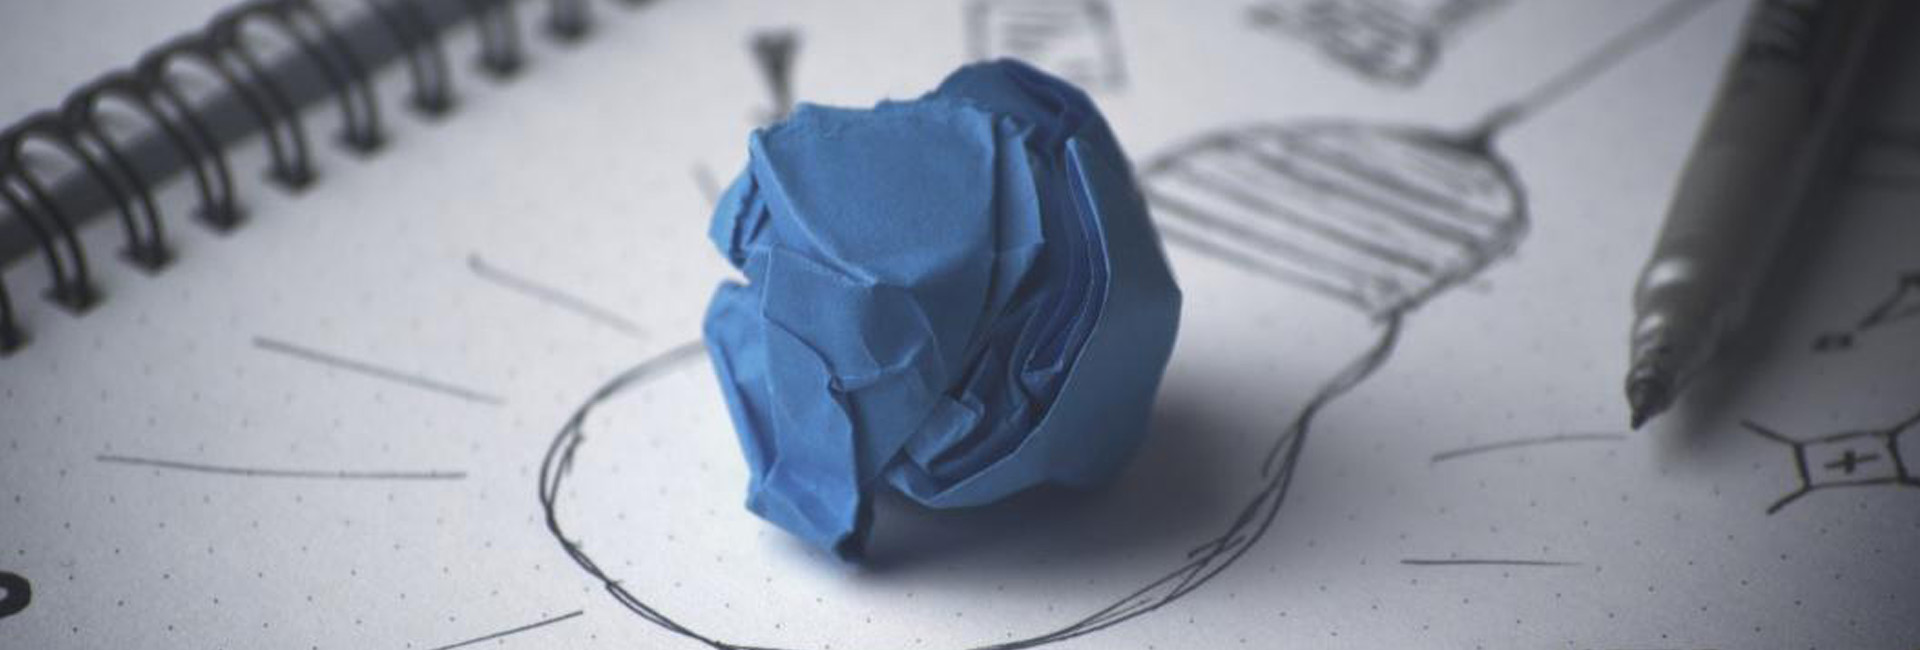 a wadded up piece of blue paper on top of a white sheet of paper with a lightbulb drawn on it in black ink